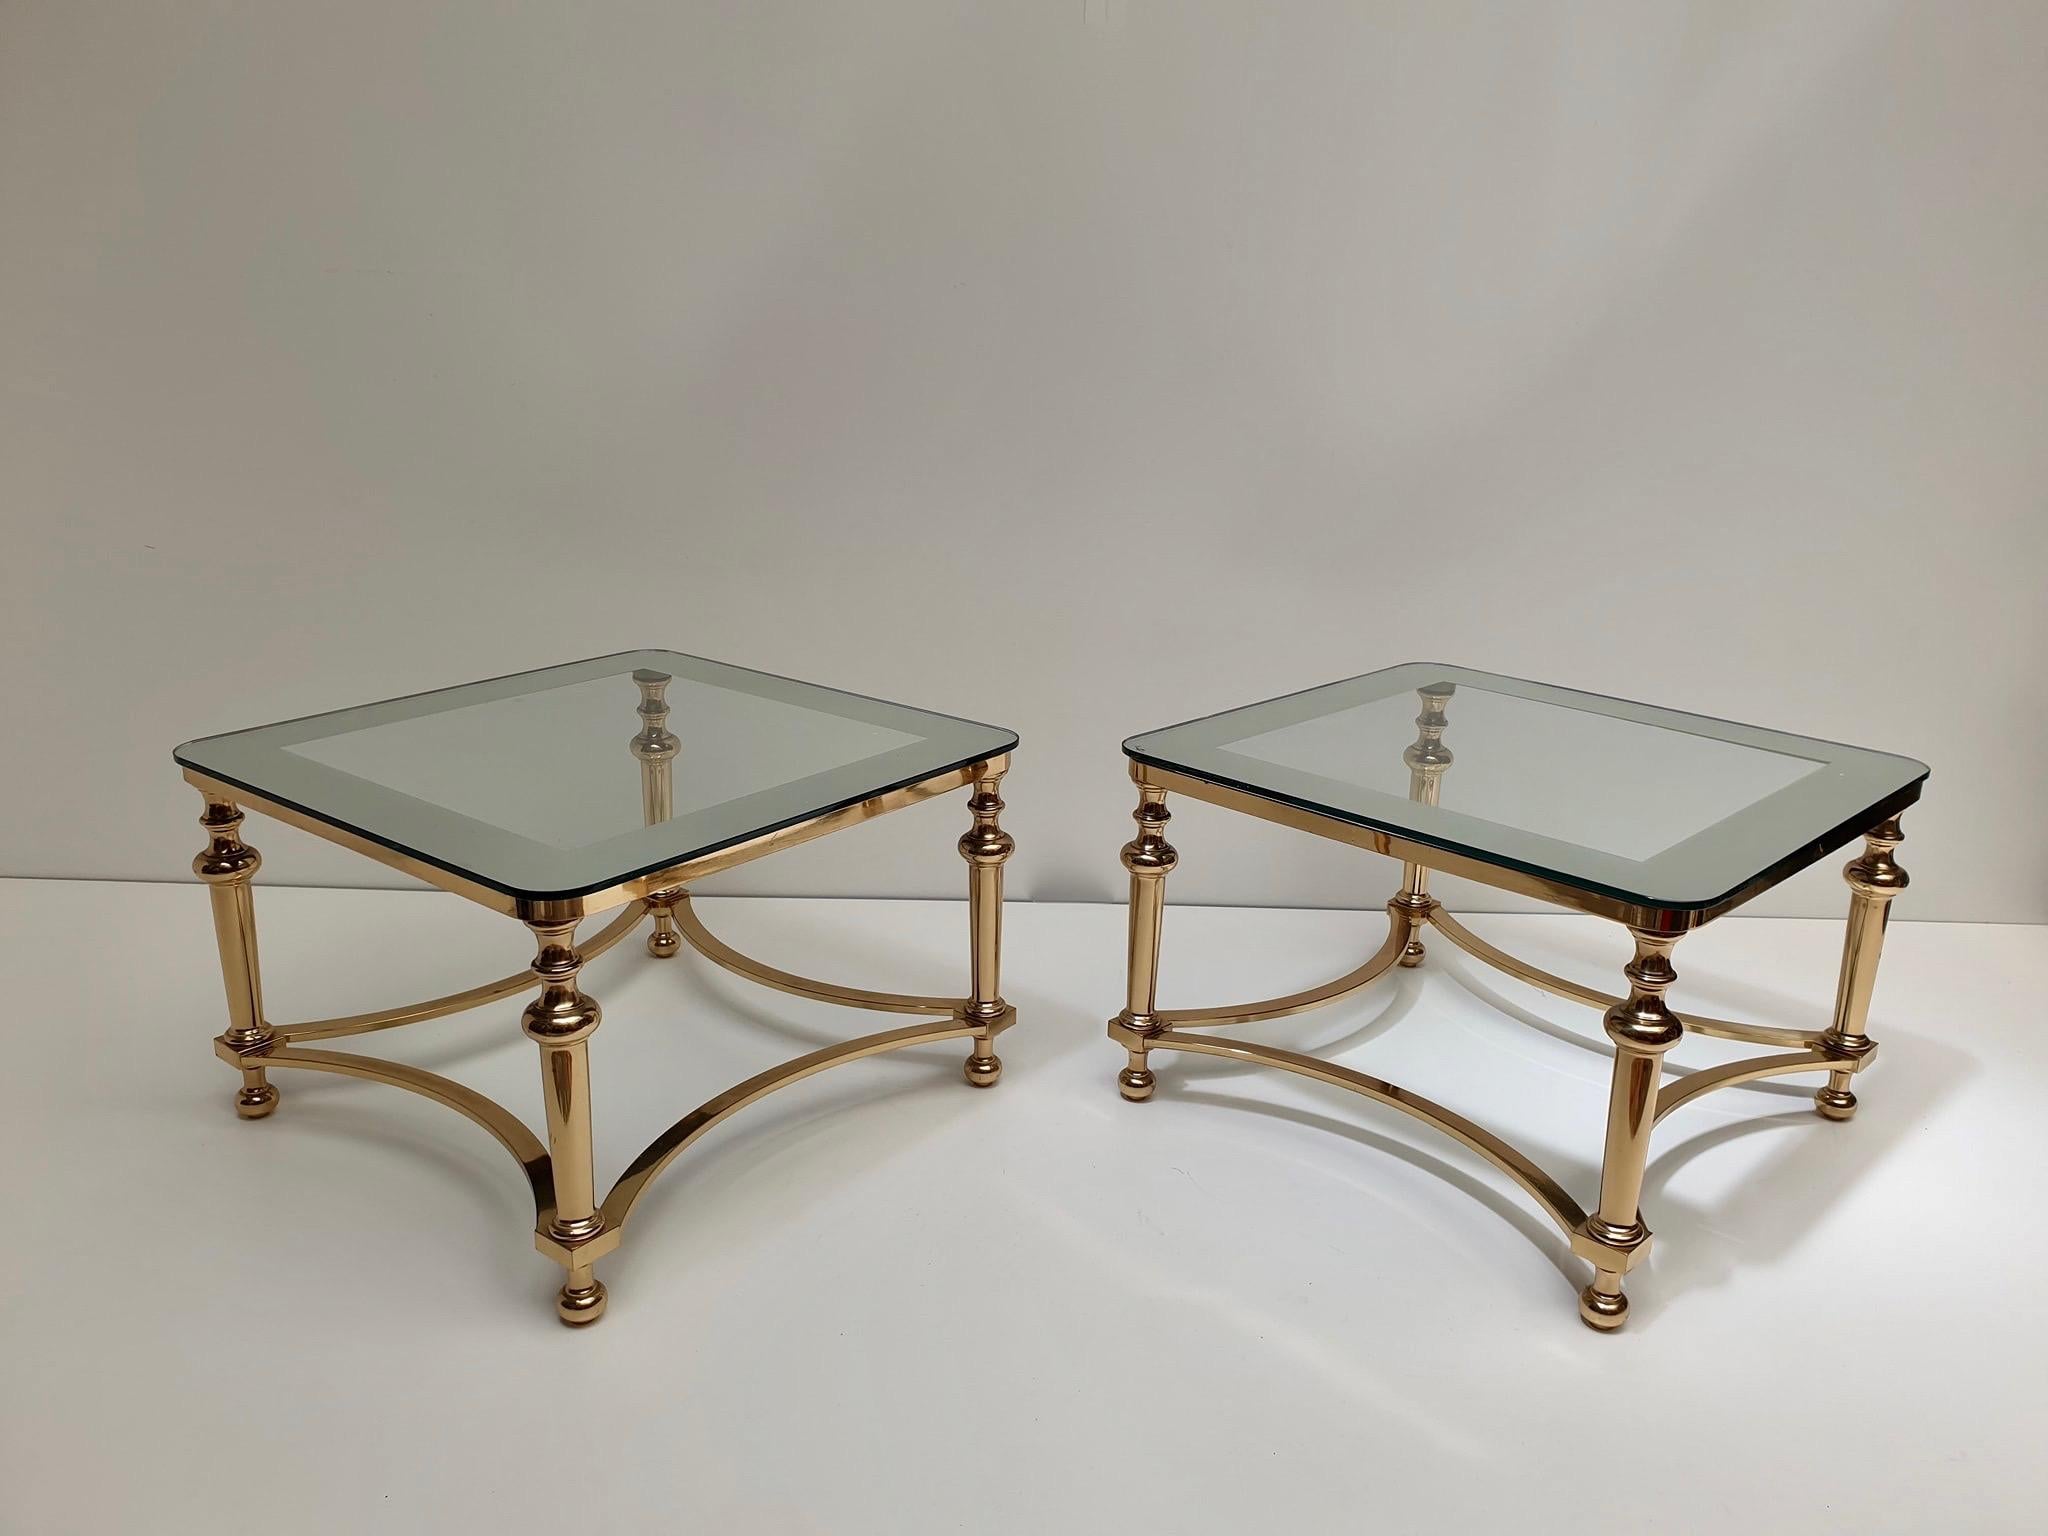 Stunning pair of Hollywood Regency side tables. 
The tables are just stunning and elegant, the tops are made of glass on a brass base. 

Measurements: 40 cm height x 61 cm width.